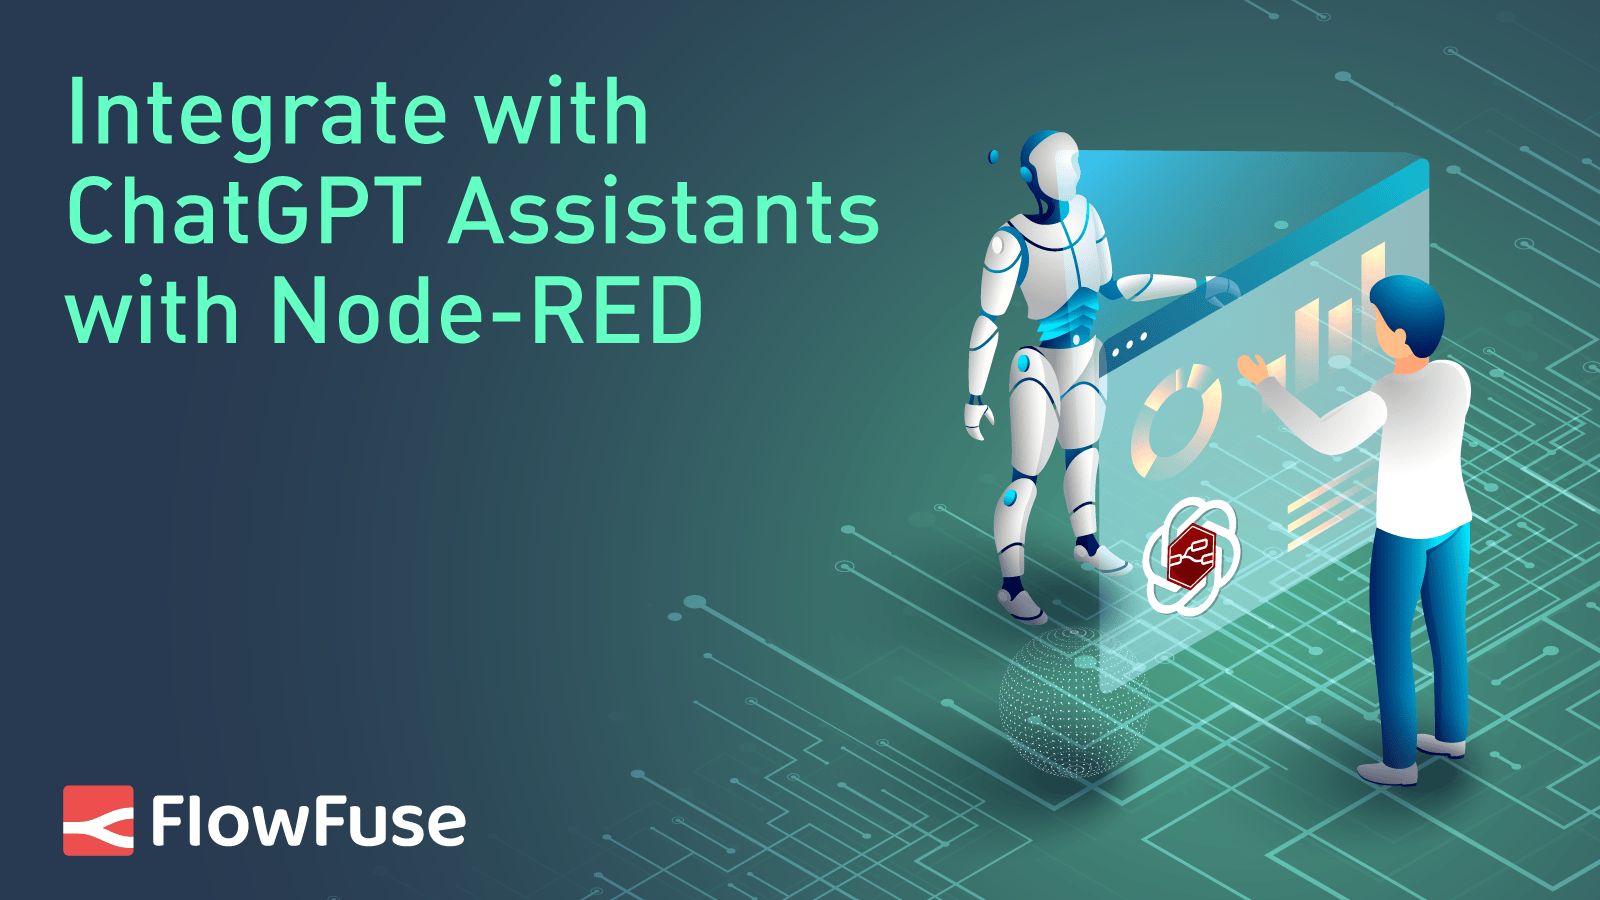 Image representing Integrate with ChatGPT Assistants with Node-RED